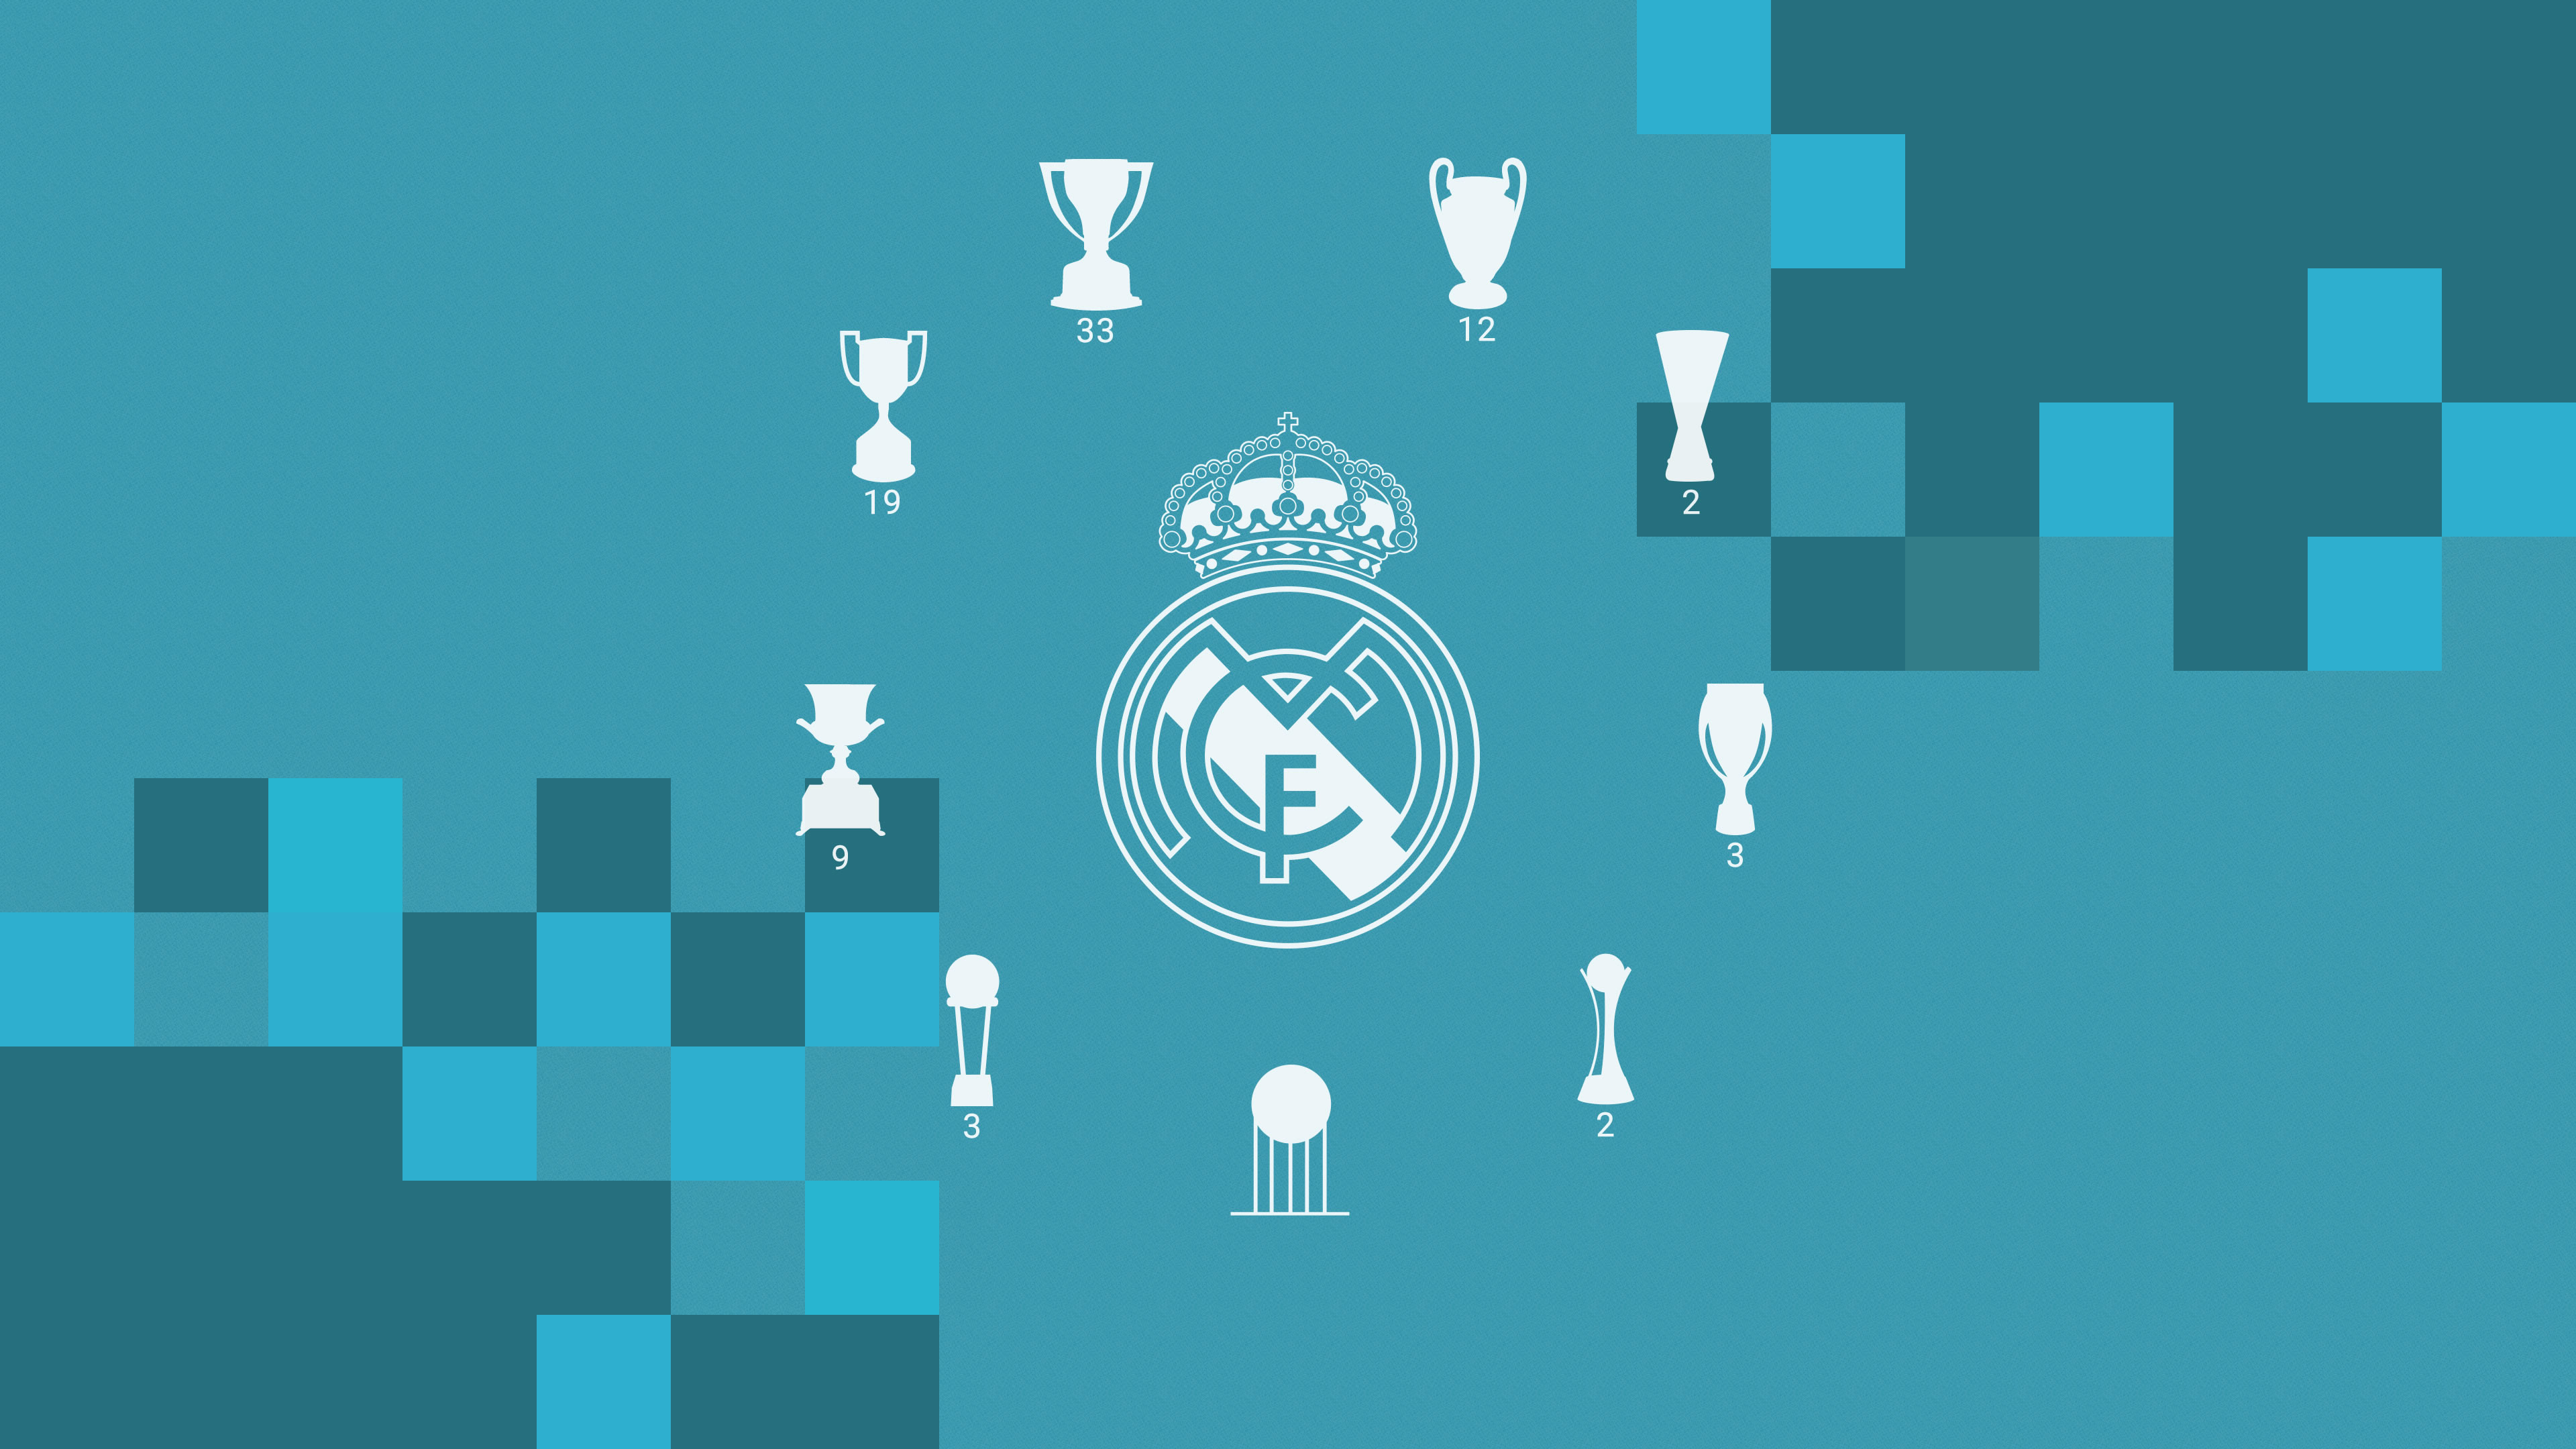 Real Madrid Wallpaper HD 2018 (71+ images)